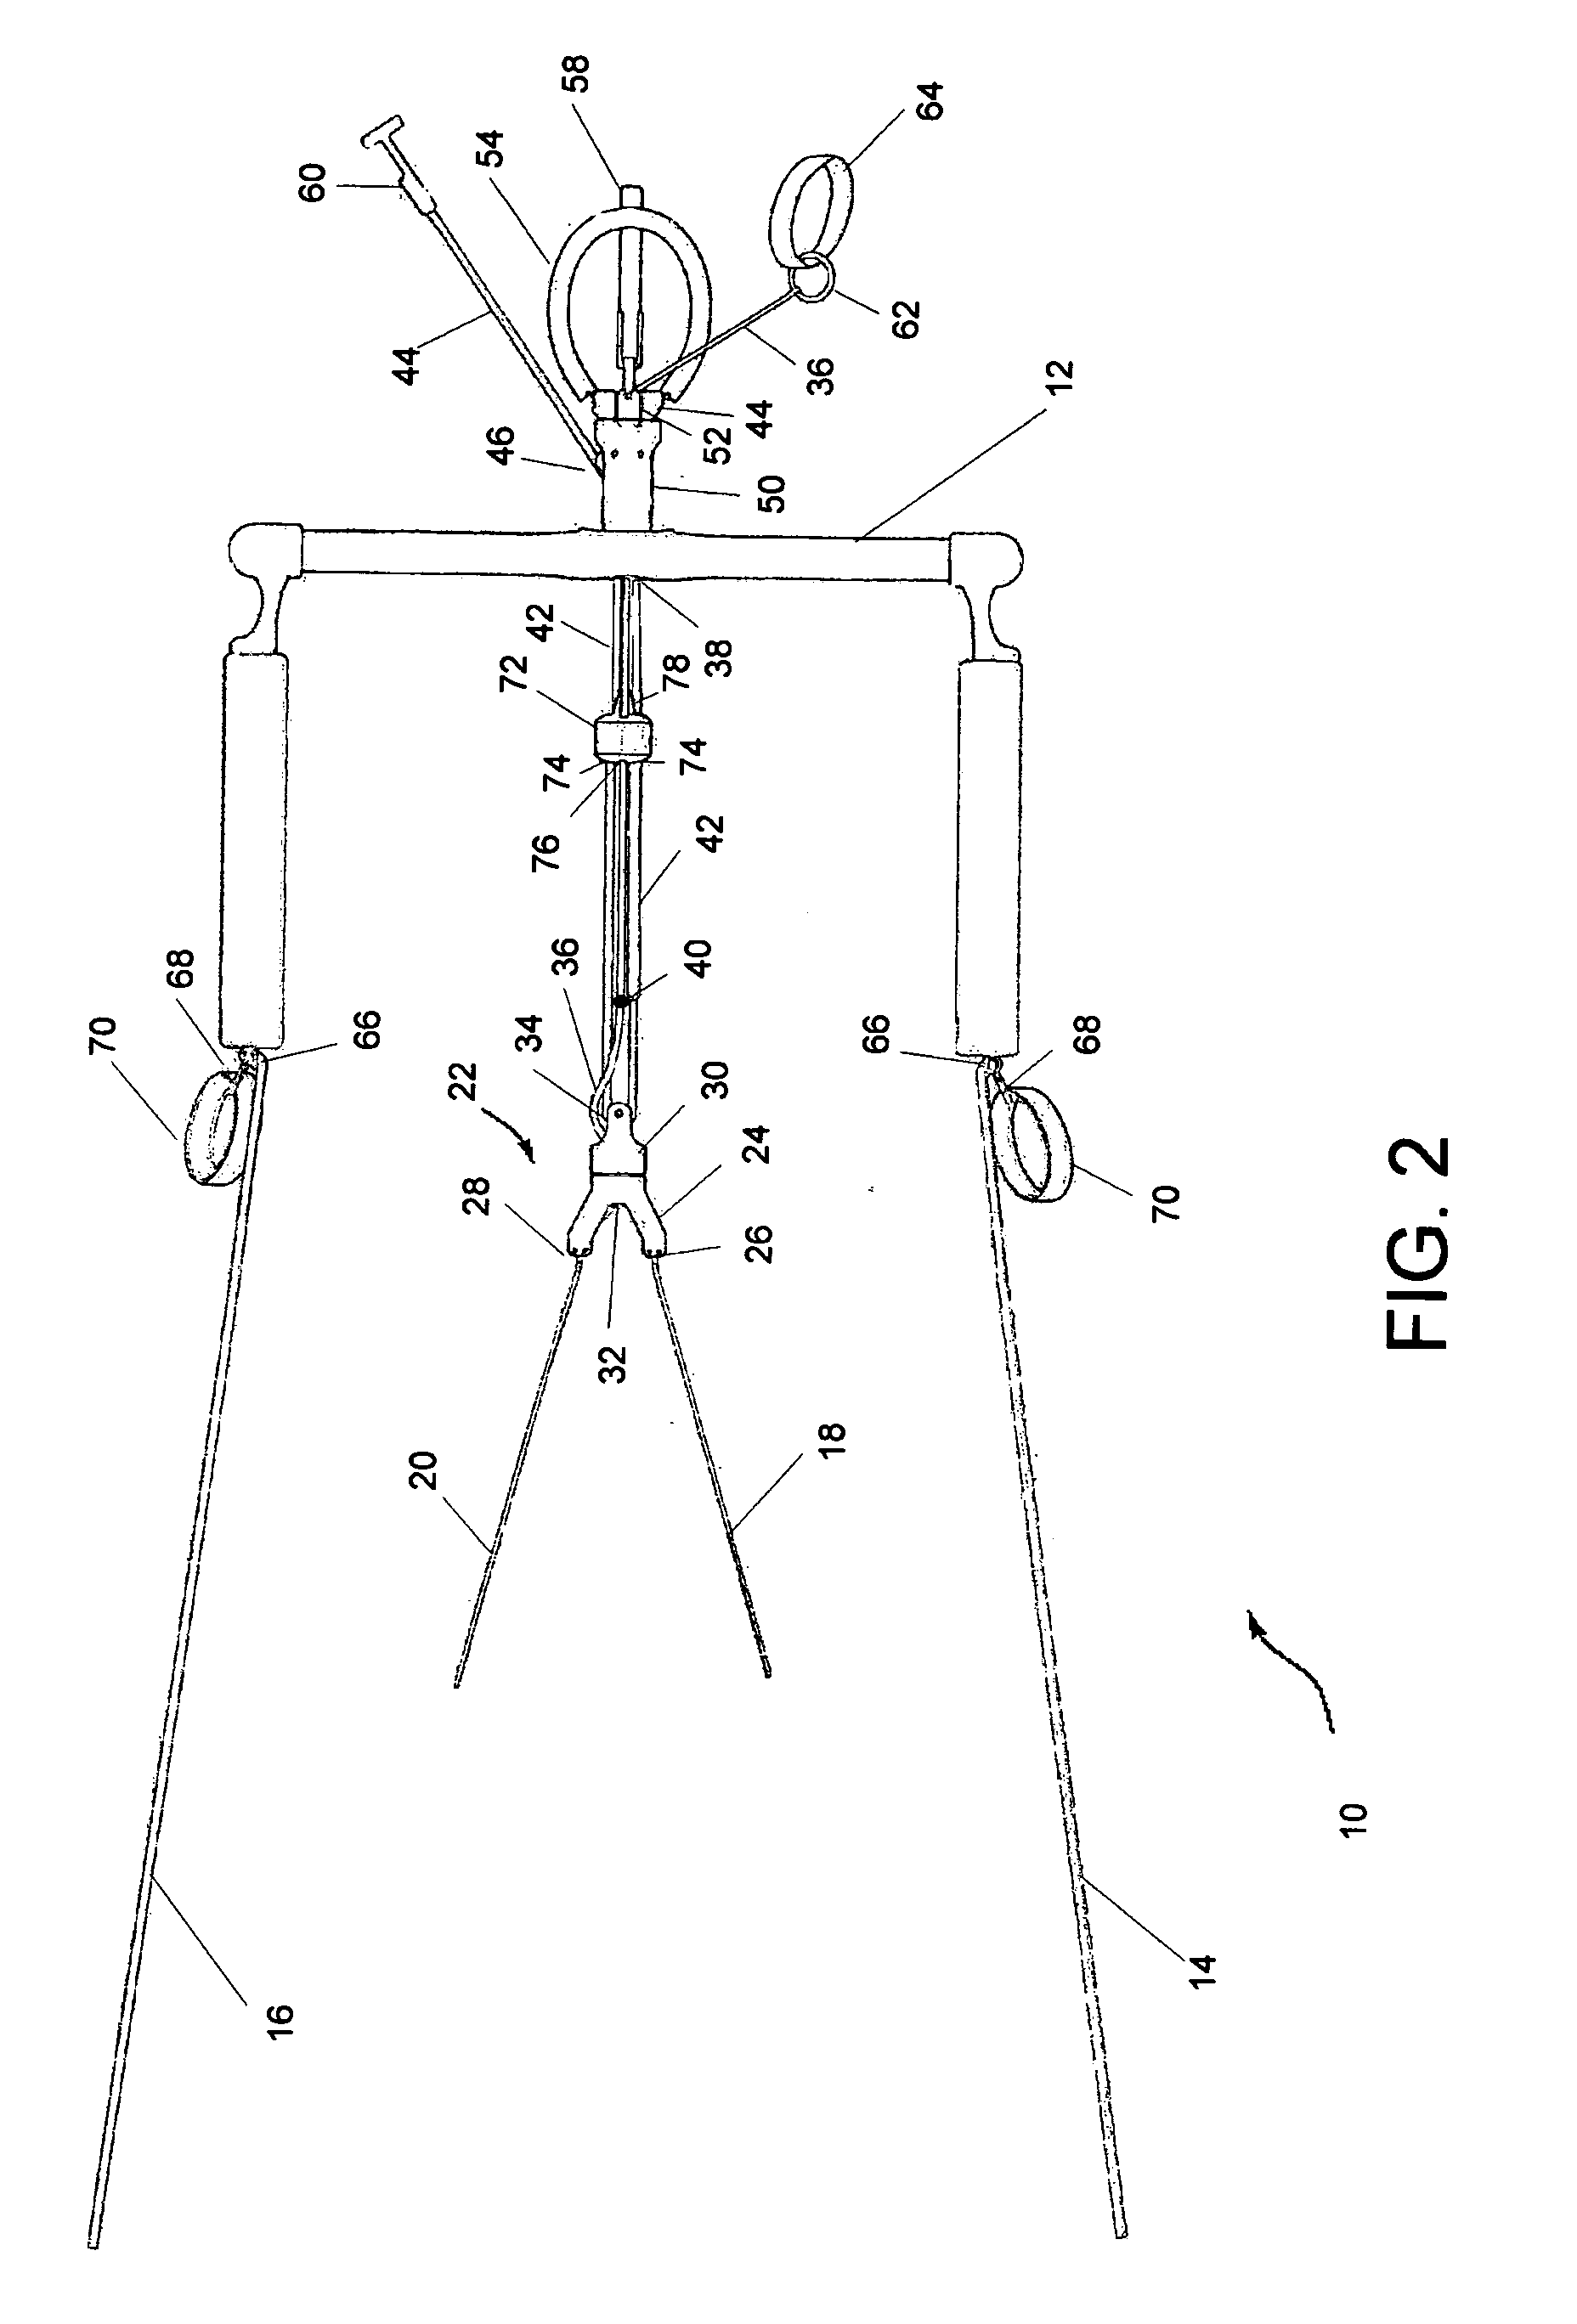 Kite control device with free rotation